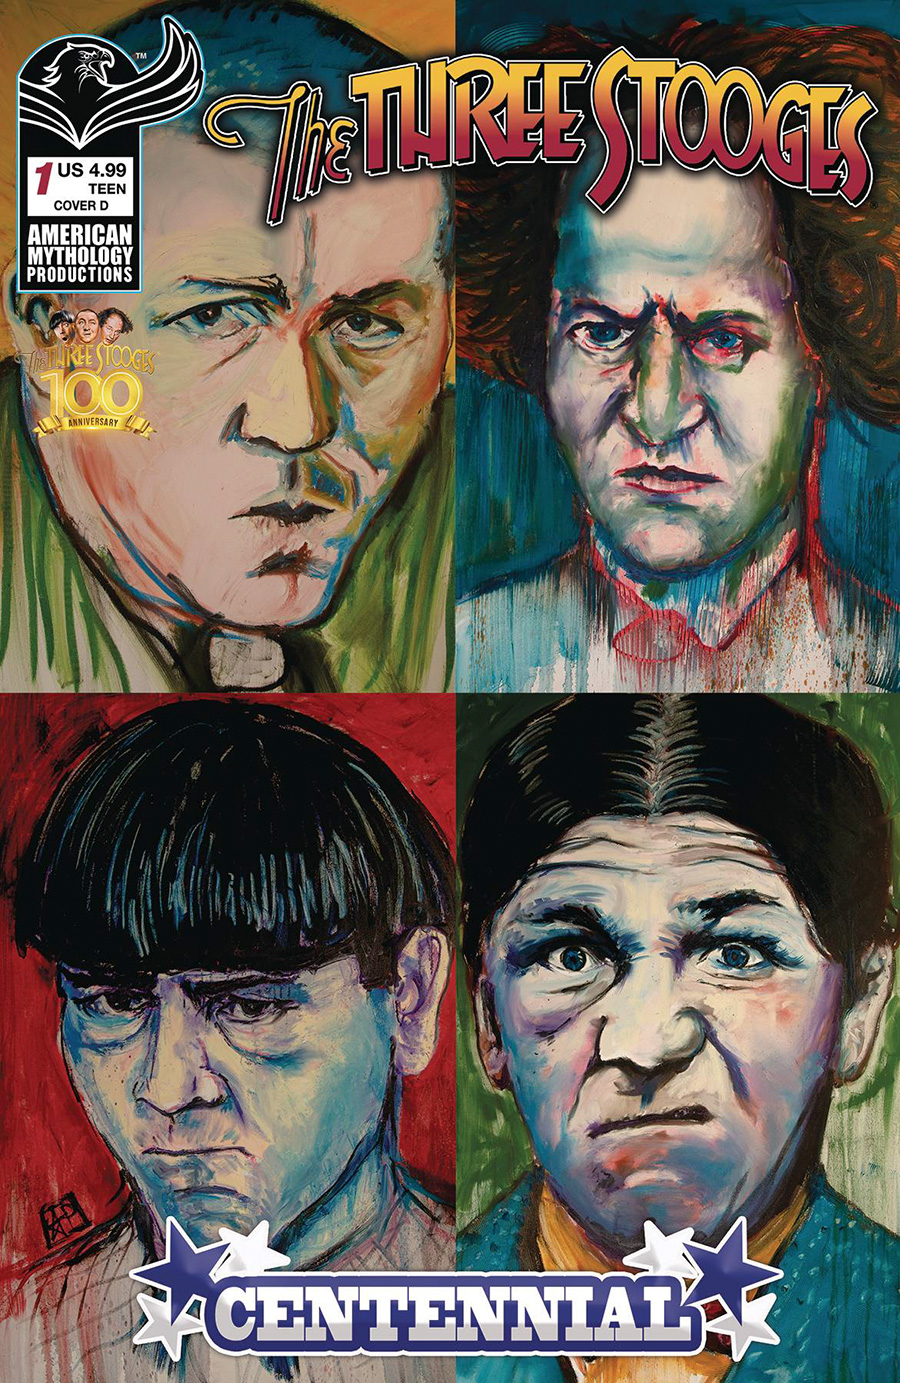 Three Stooges Centennial #1 (One Shot) Cover D Variant Andy Pagna Painting Cover